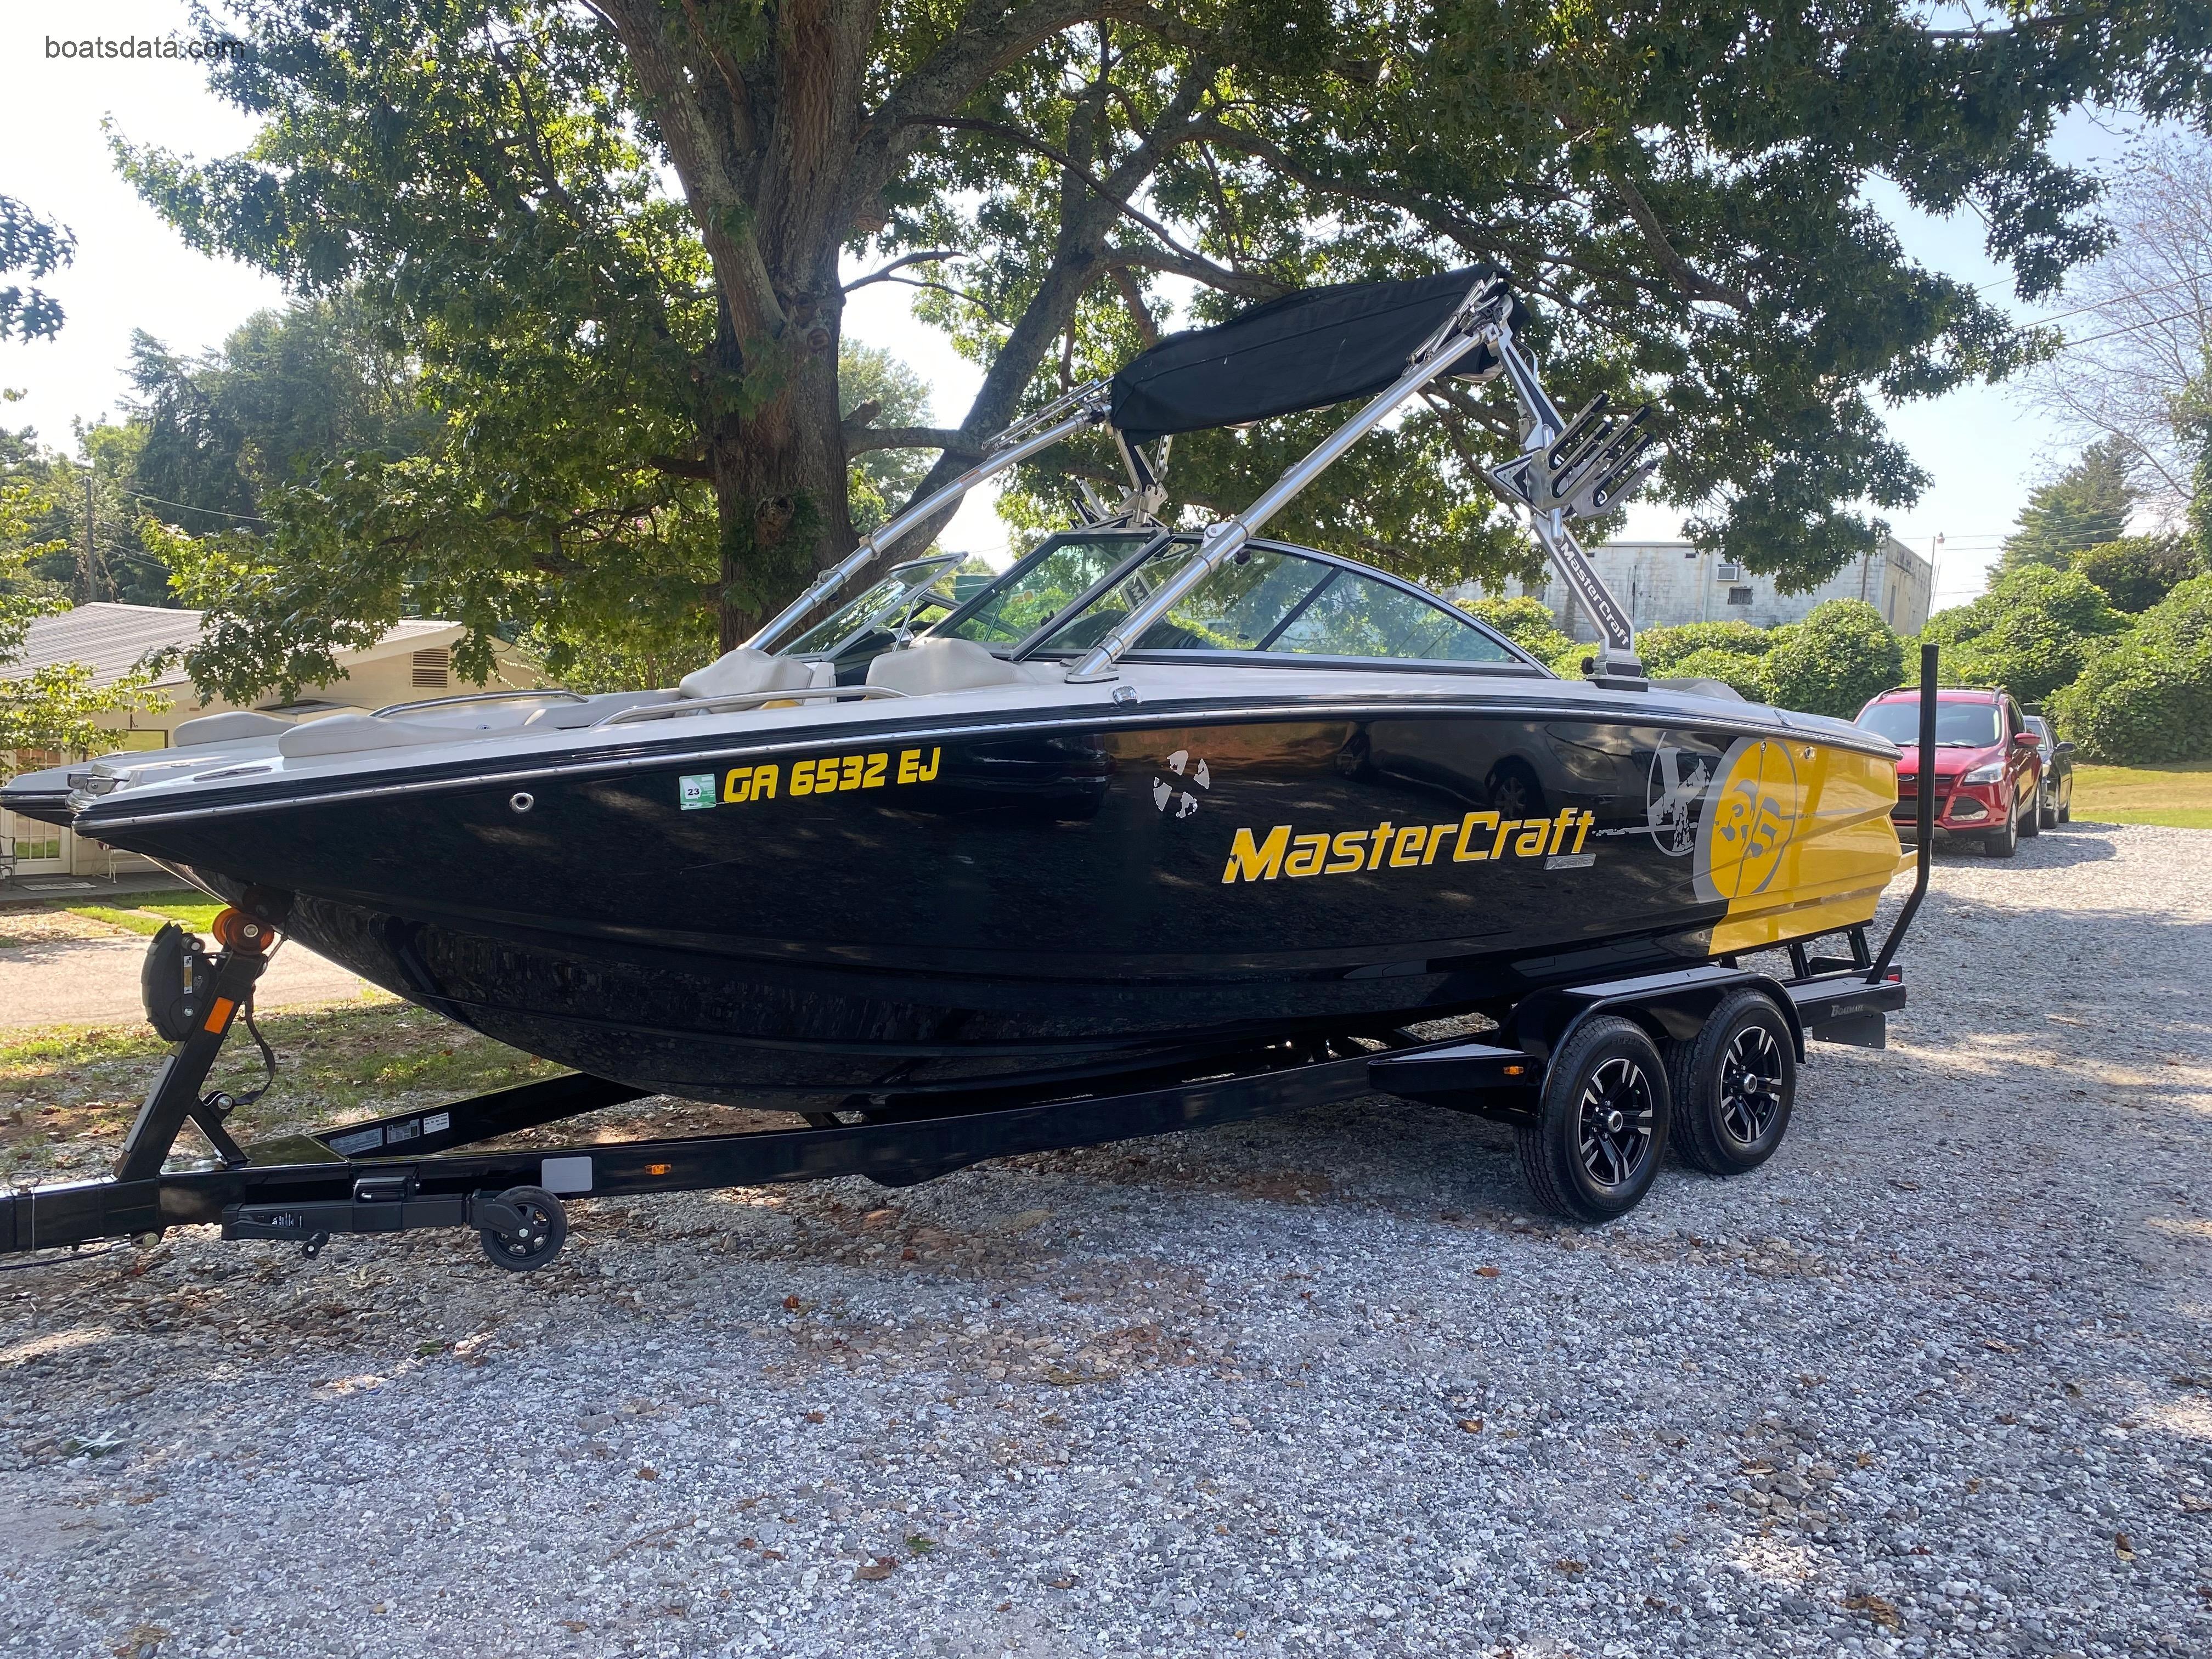 Mastercraft X35 tv detailed specifications and features